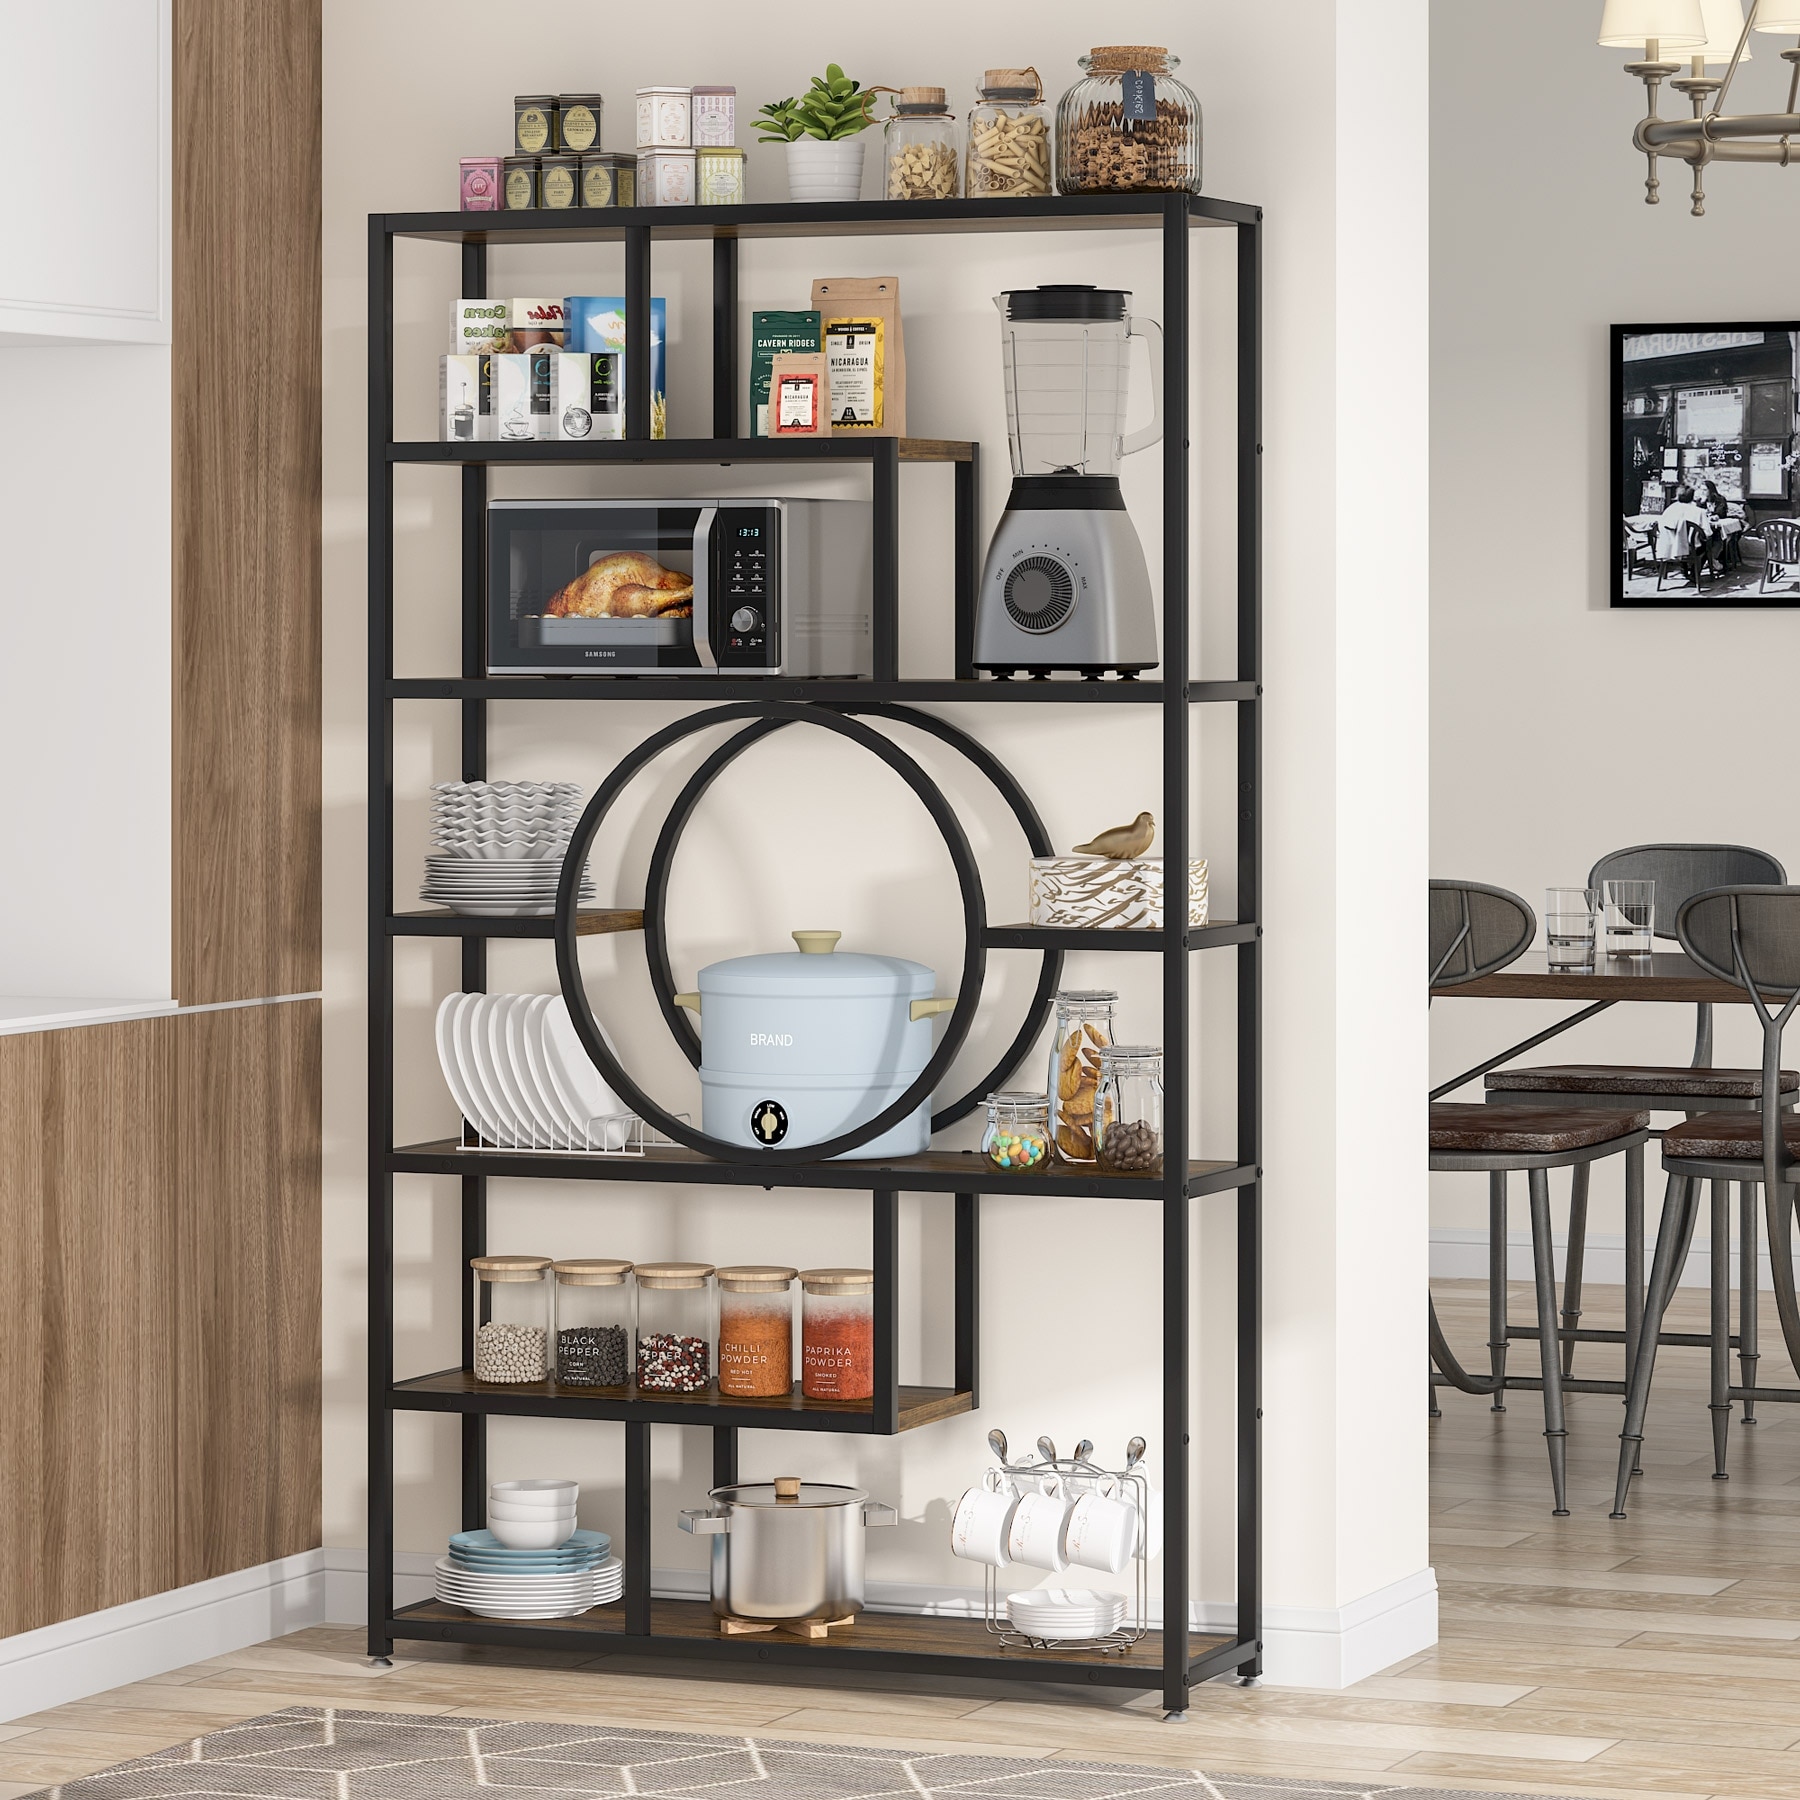 https://ak1.ostkcdn.com/images/products/is/images/direct/7a93e3ca836ae05234ea1d8d1f398322f405ae1a/7-Tier-Tall-Etagere-Bookcases-Book-Shelves%2C72%E2%80%99%E2%80%99-Industrial-Bookshelves%2C-Wood-Open-Shelf-Display-Stand-for-Living-Room-Office.jpg